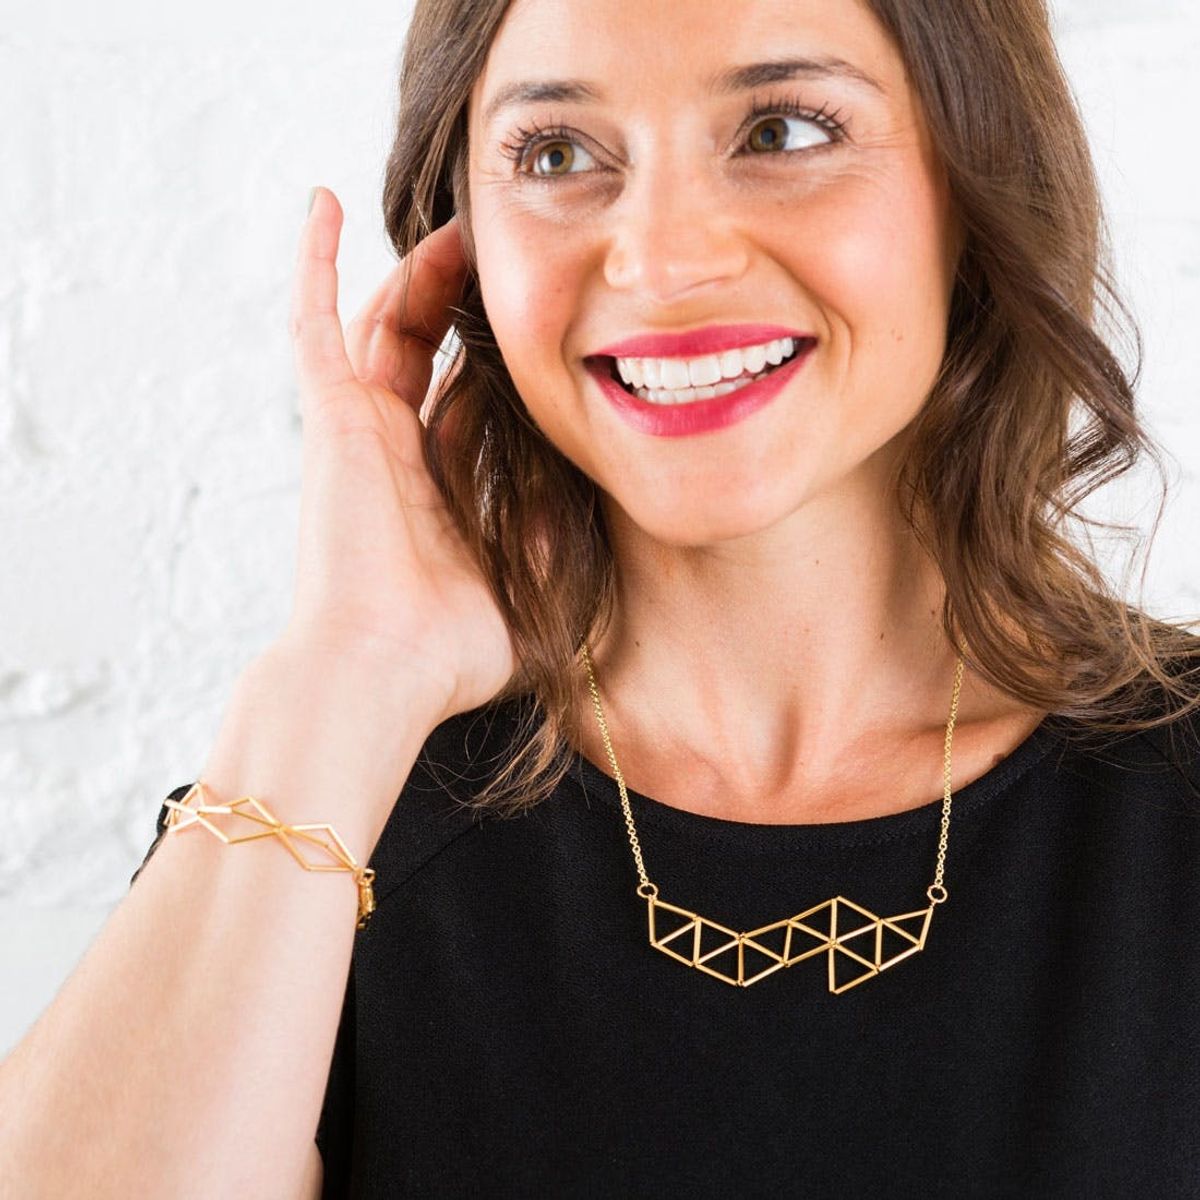 Get Geometric With This Modern Jewelry DIY